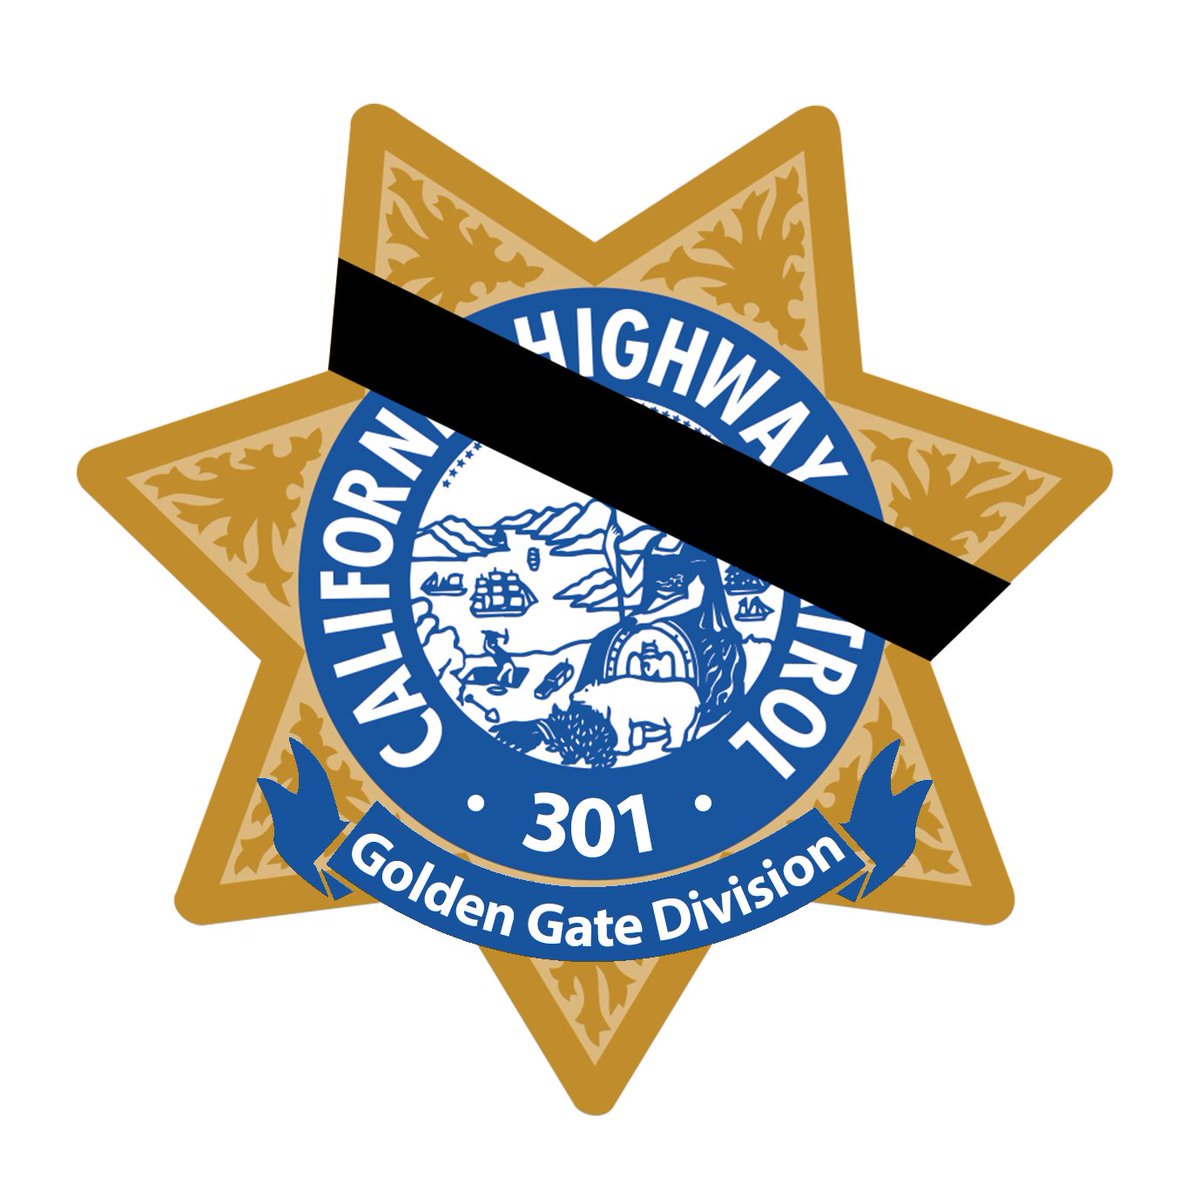 Our hearts are heavy as we join our @oaklandpoliceca family in mourning the loss of one of their own. The entire OPD organization remains in our thoughts as they come together to remember and honor their fallen colleague. #neverforget